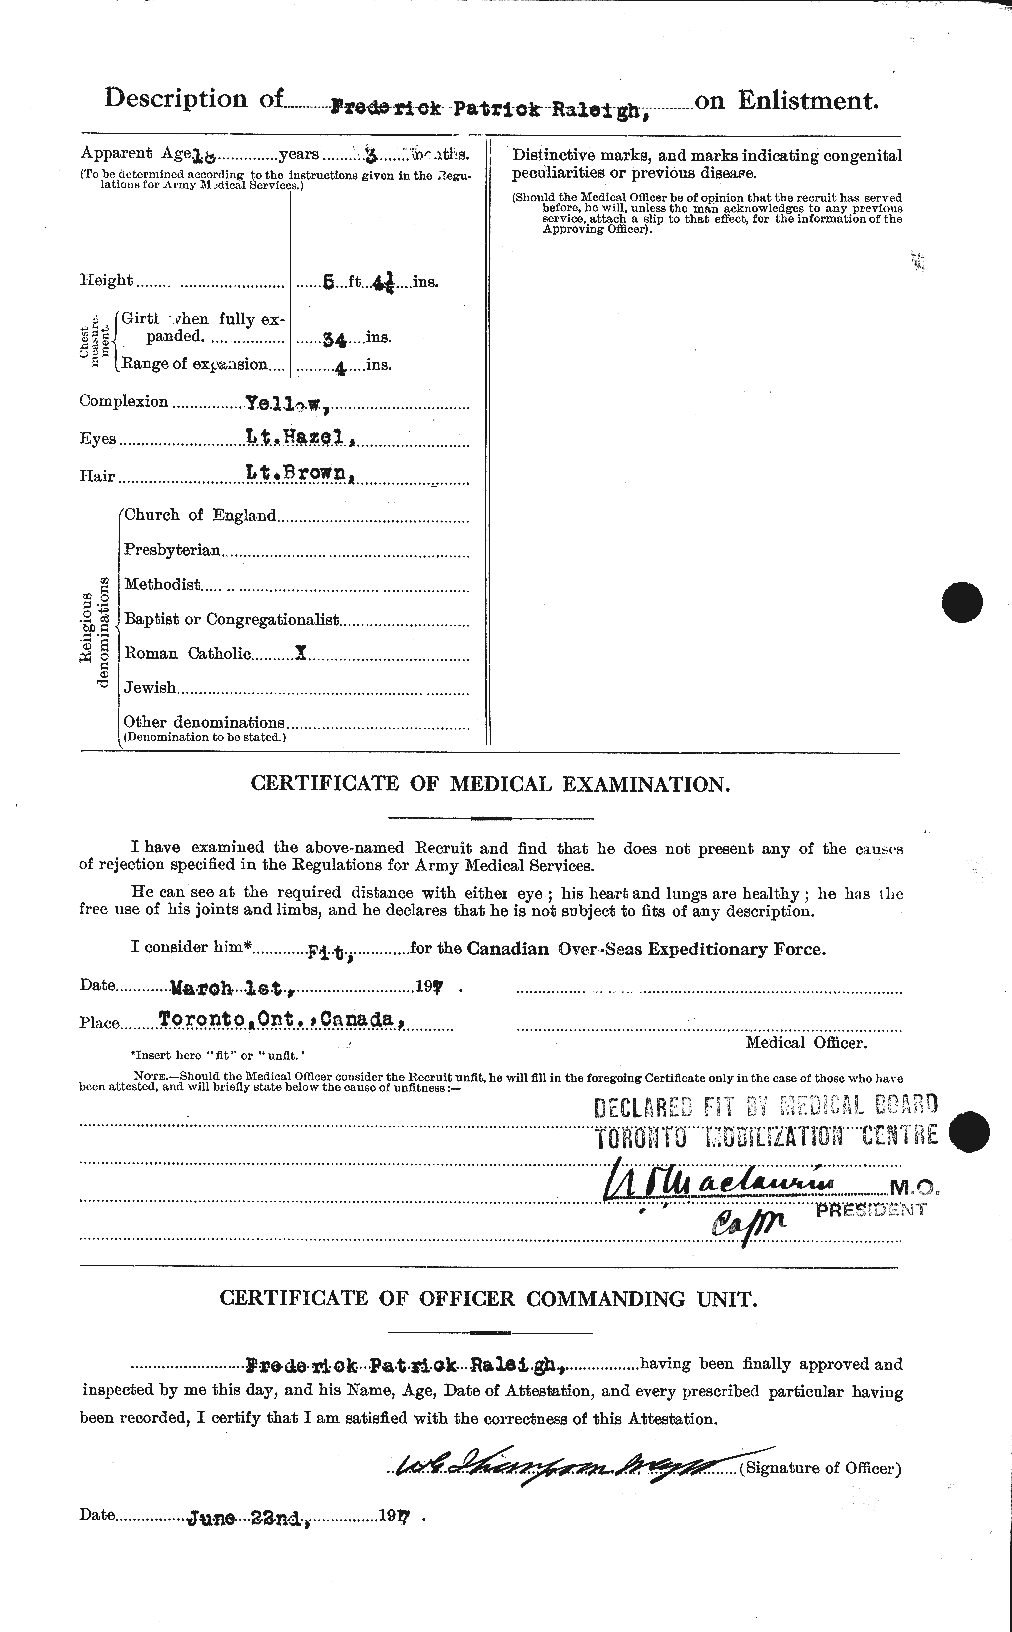 Personnel Records of the First World War - CEF 594450b